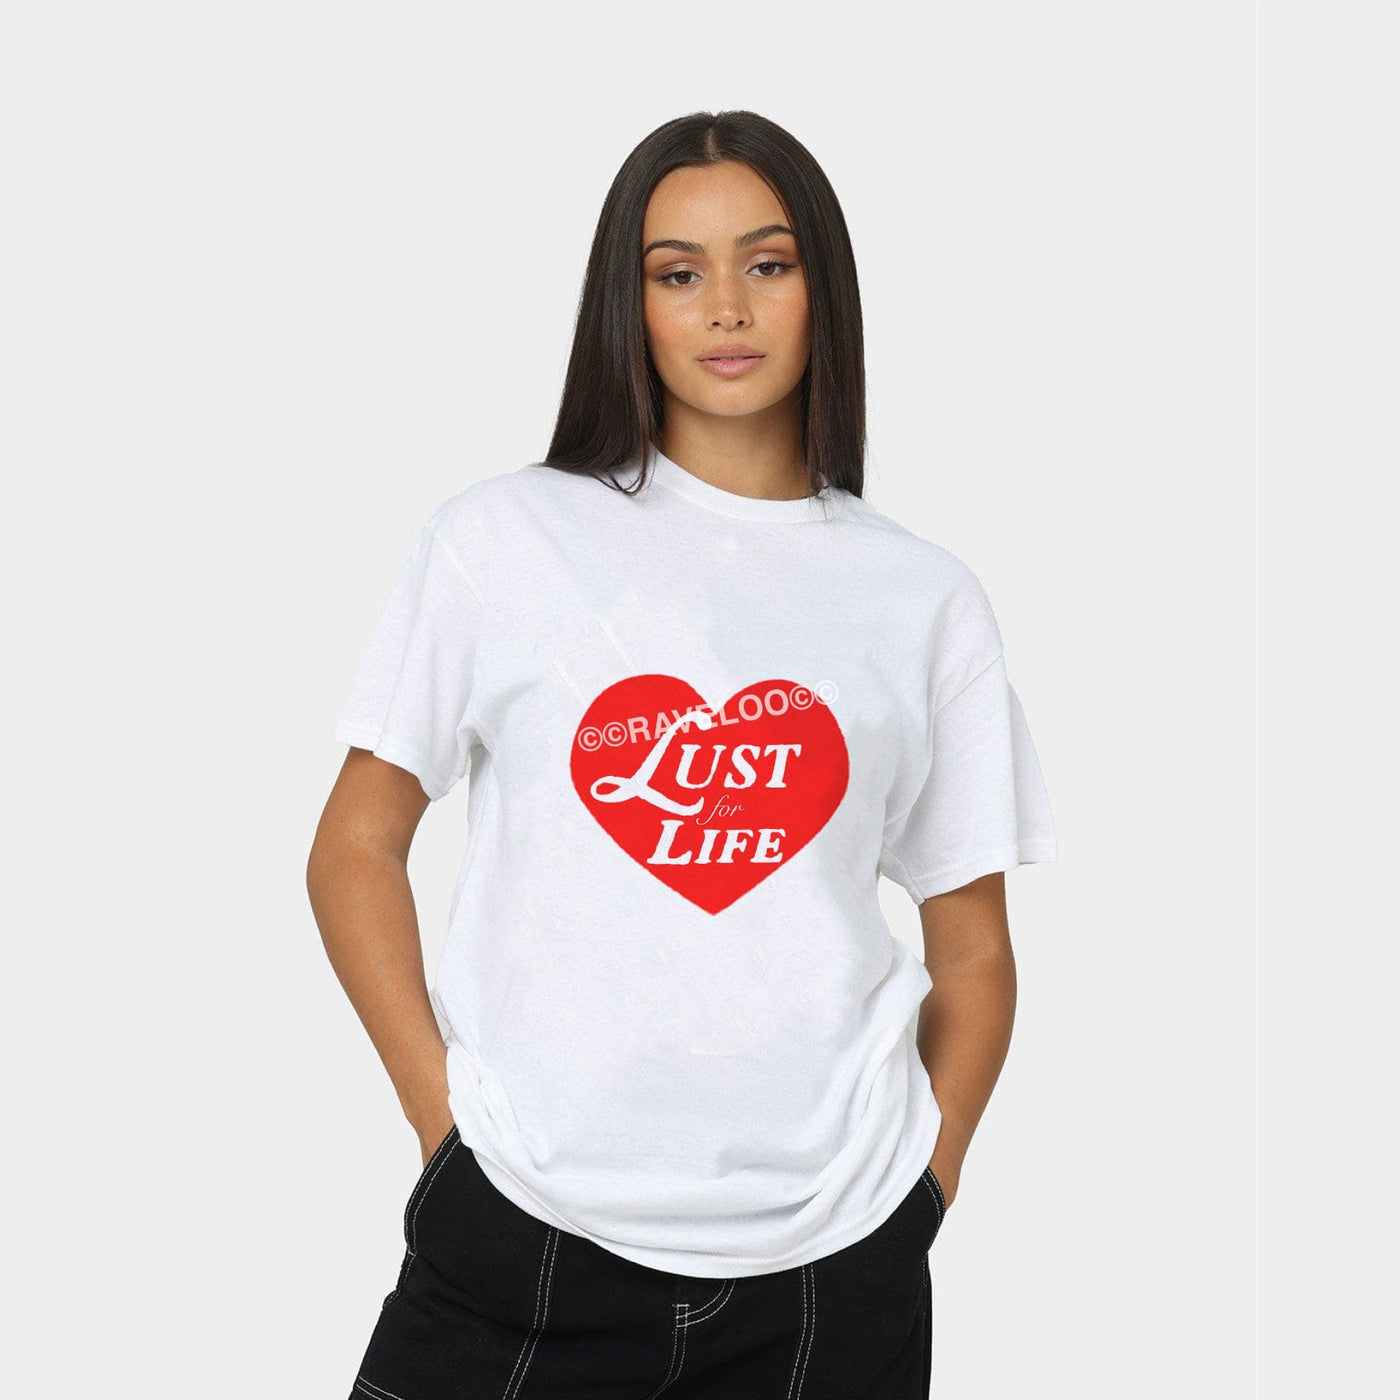 Lust for life T-shirt